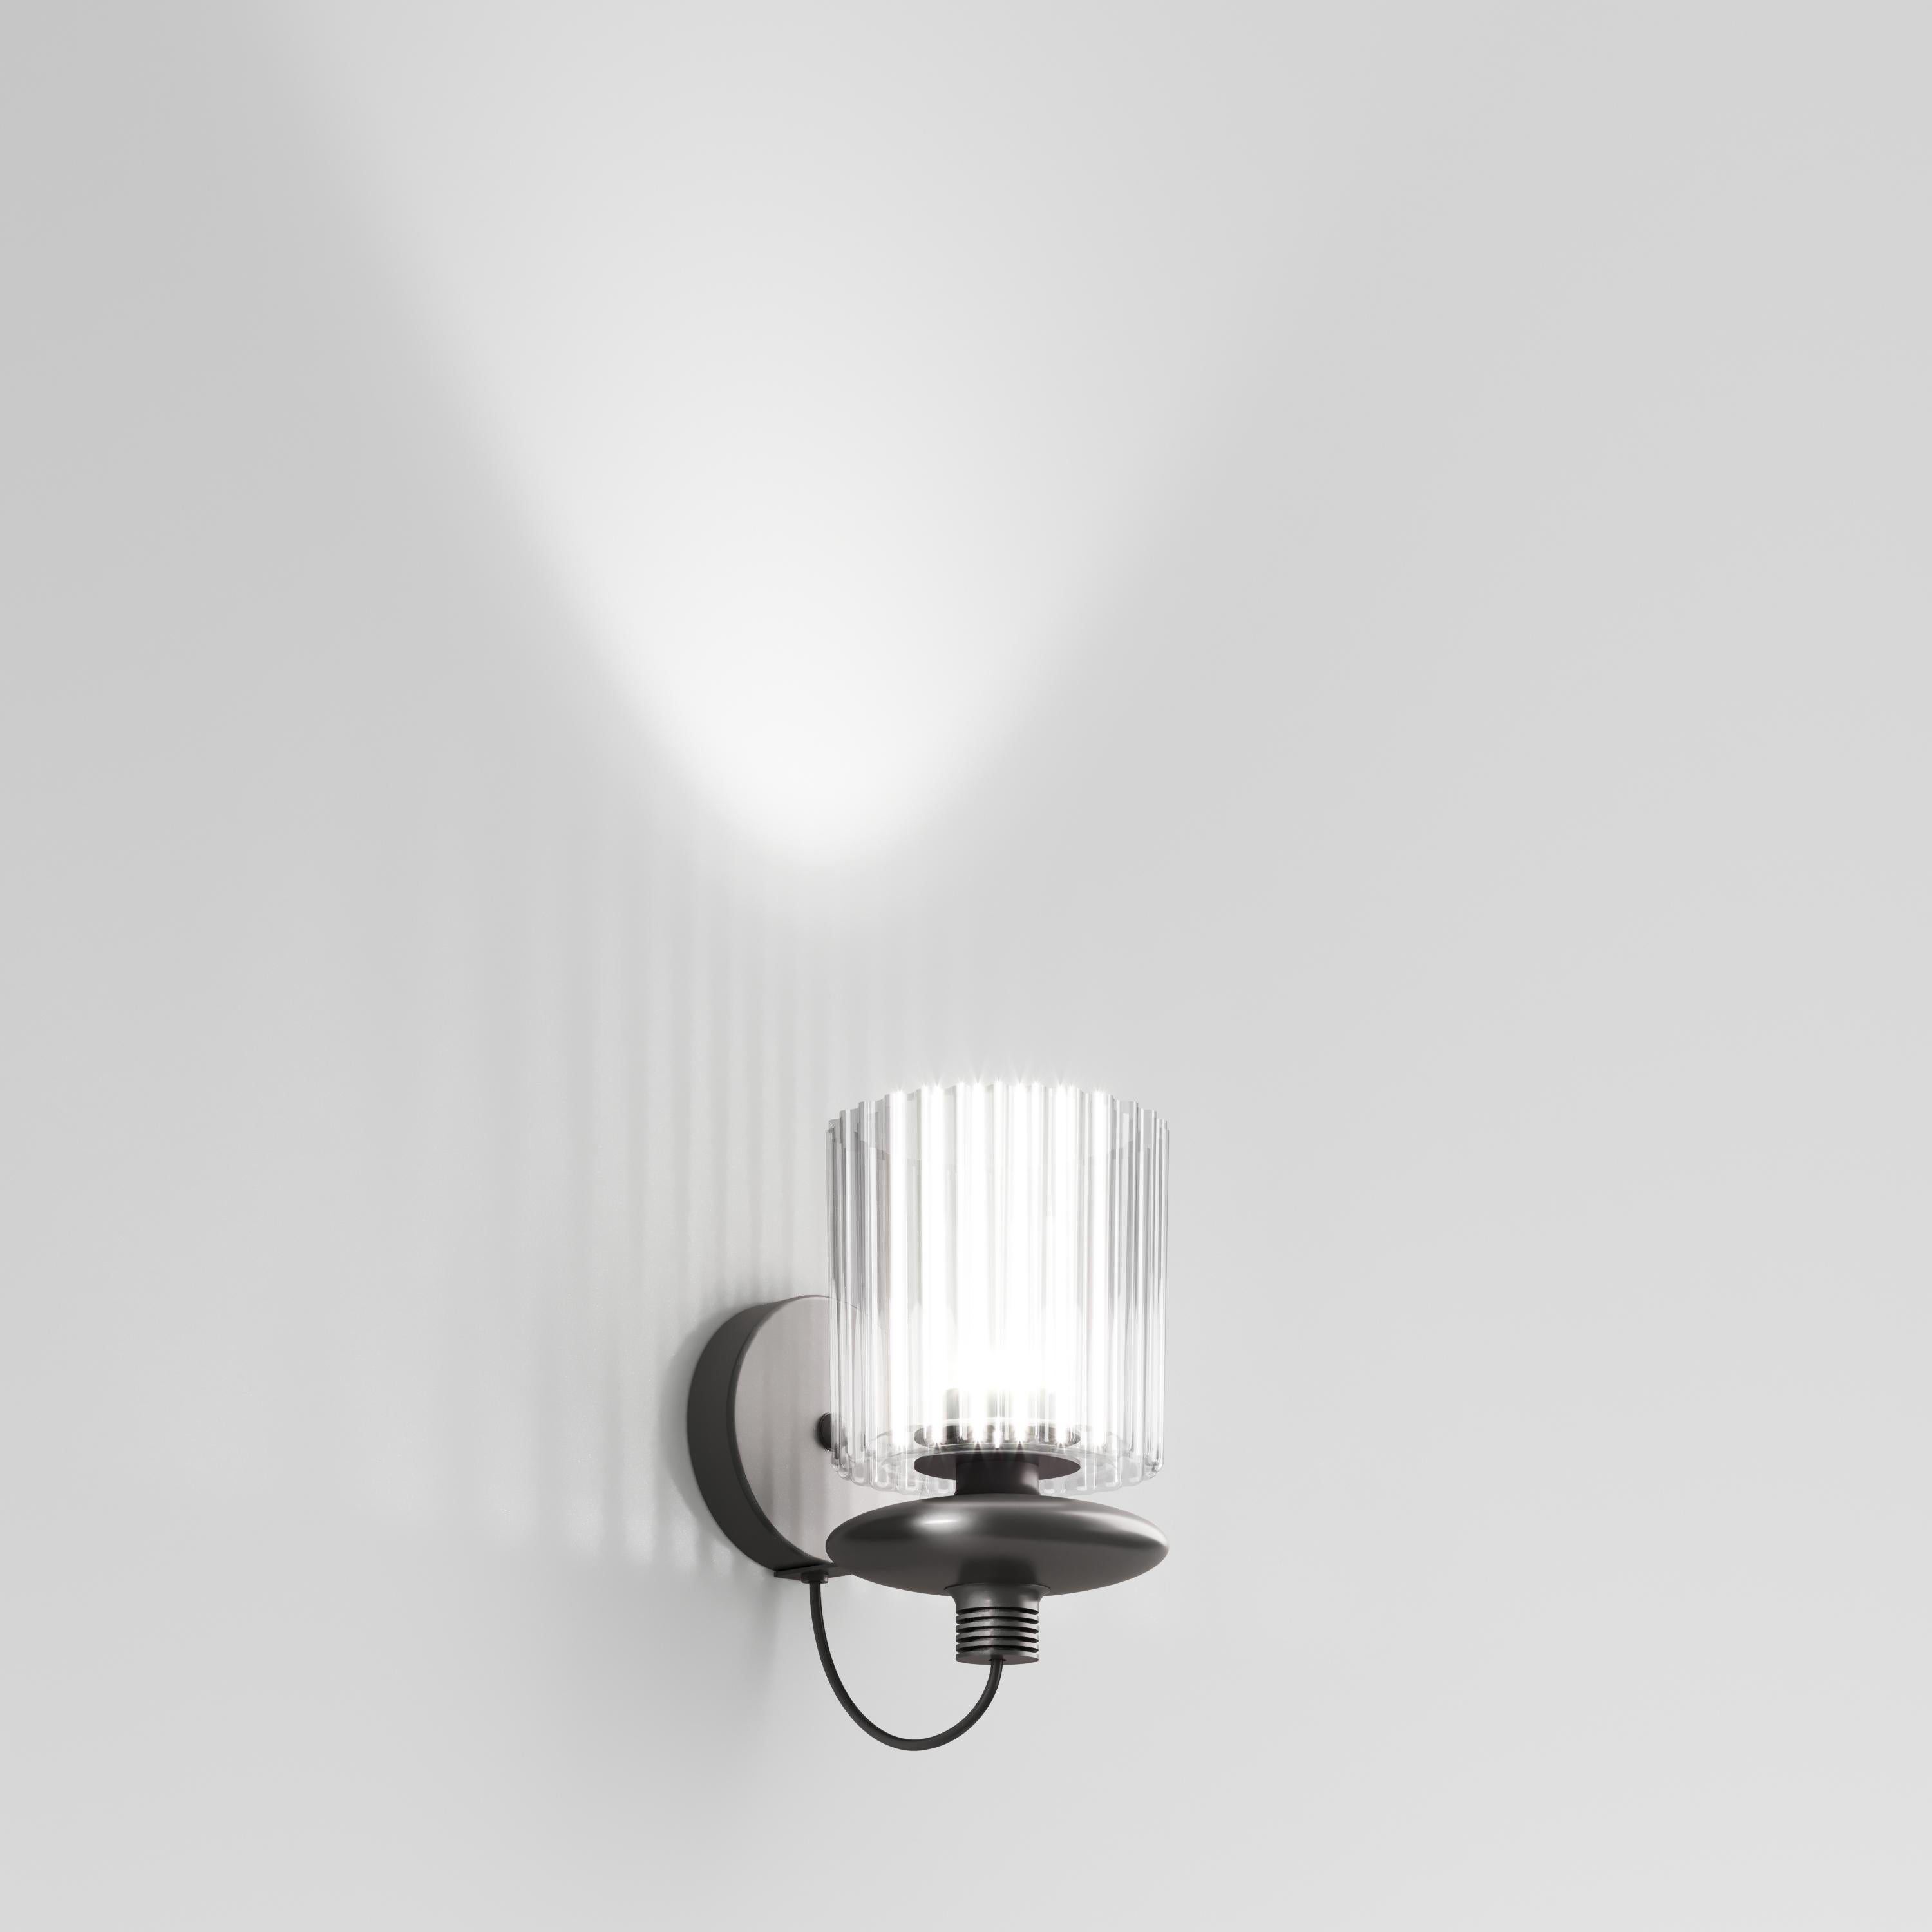 The “technicity” of the metal element combined with the blown glass diffuser gives Tread an “industrial” style. An object reminiscent of vintage electrical equipment for its particular shape, in which the finned heat sink, combined with blown glass,